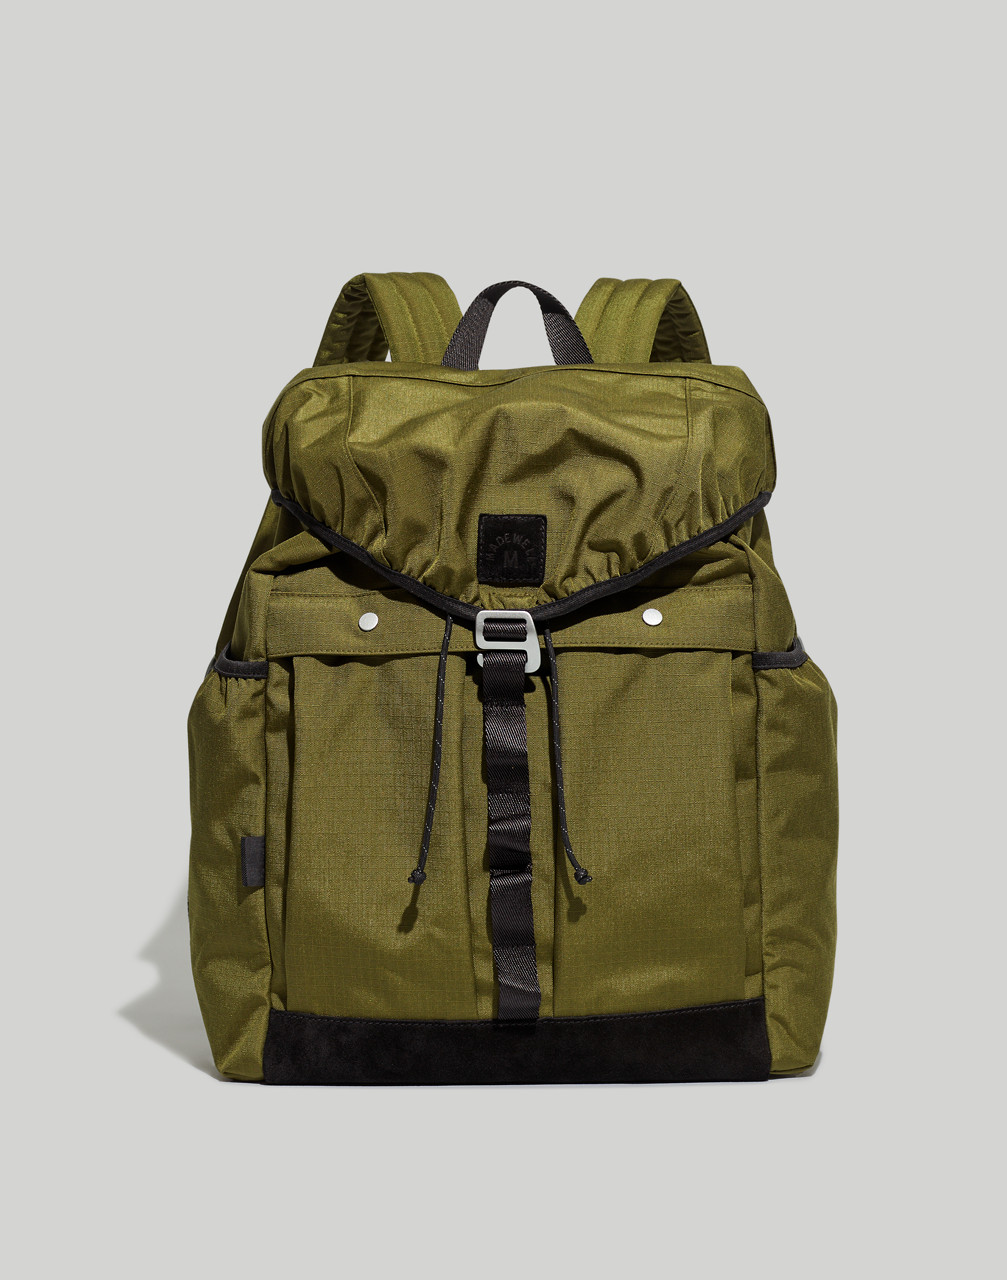 Mw The Rush Hour Backpack In Loden